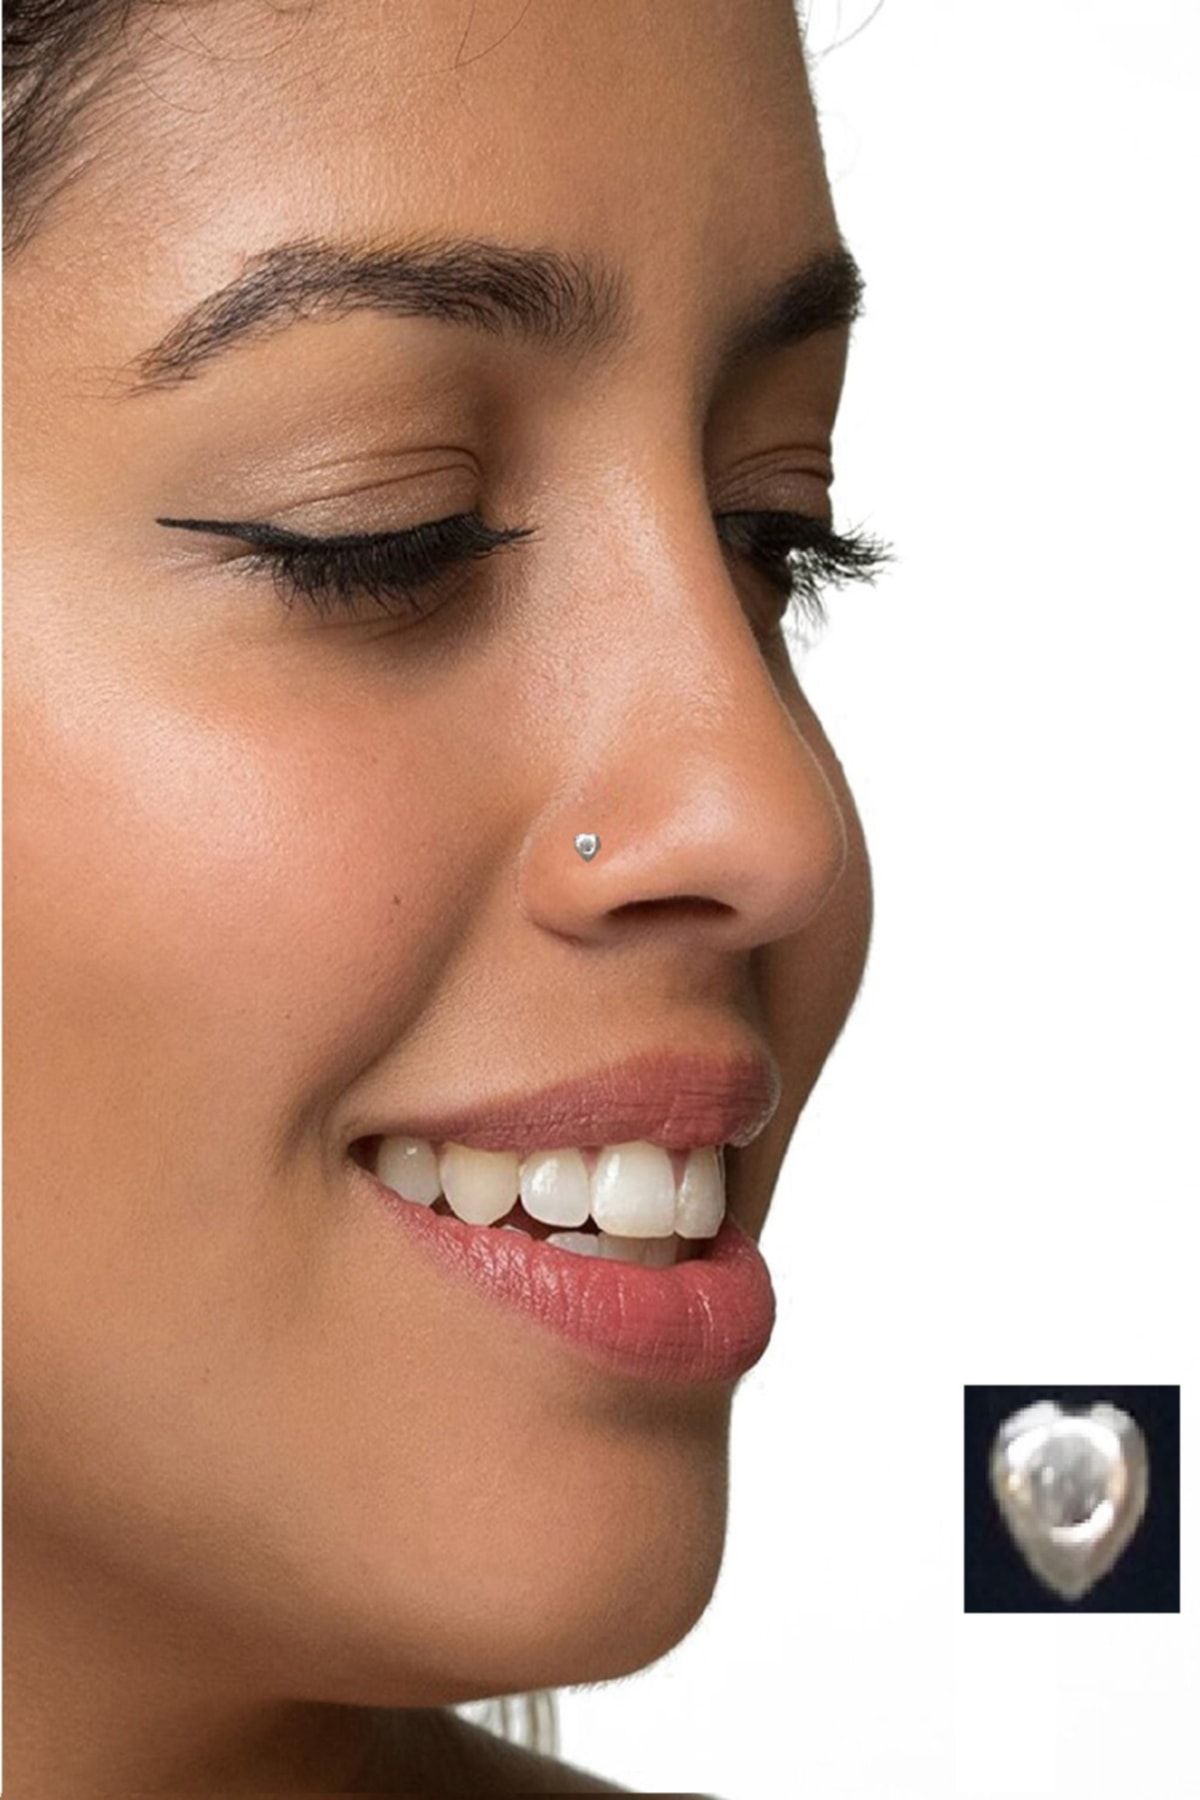 Buy THANU'S CRAFT Press on Silver Nose ring stud Non Piercing Nose Pin  without Piercing for Women (1pc Silver Nose Ring) at Amazon.in